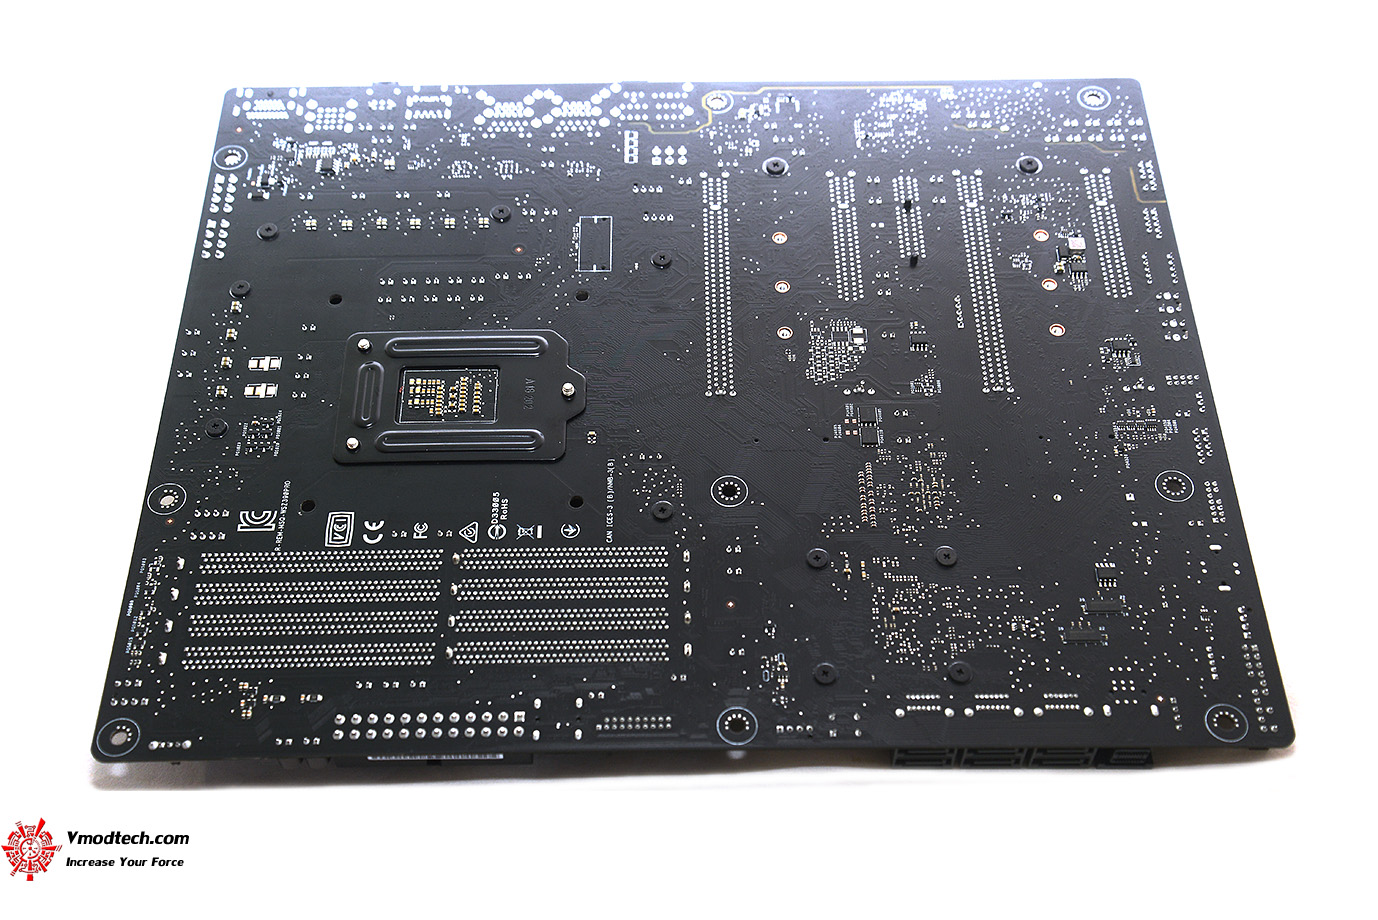 dsc 1402 ASUS WS Z390 PRO Servers & Workstations Motherboard Review